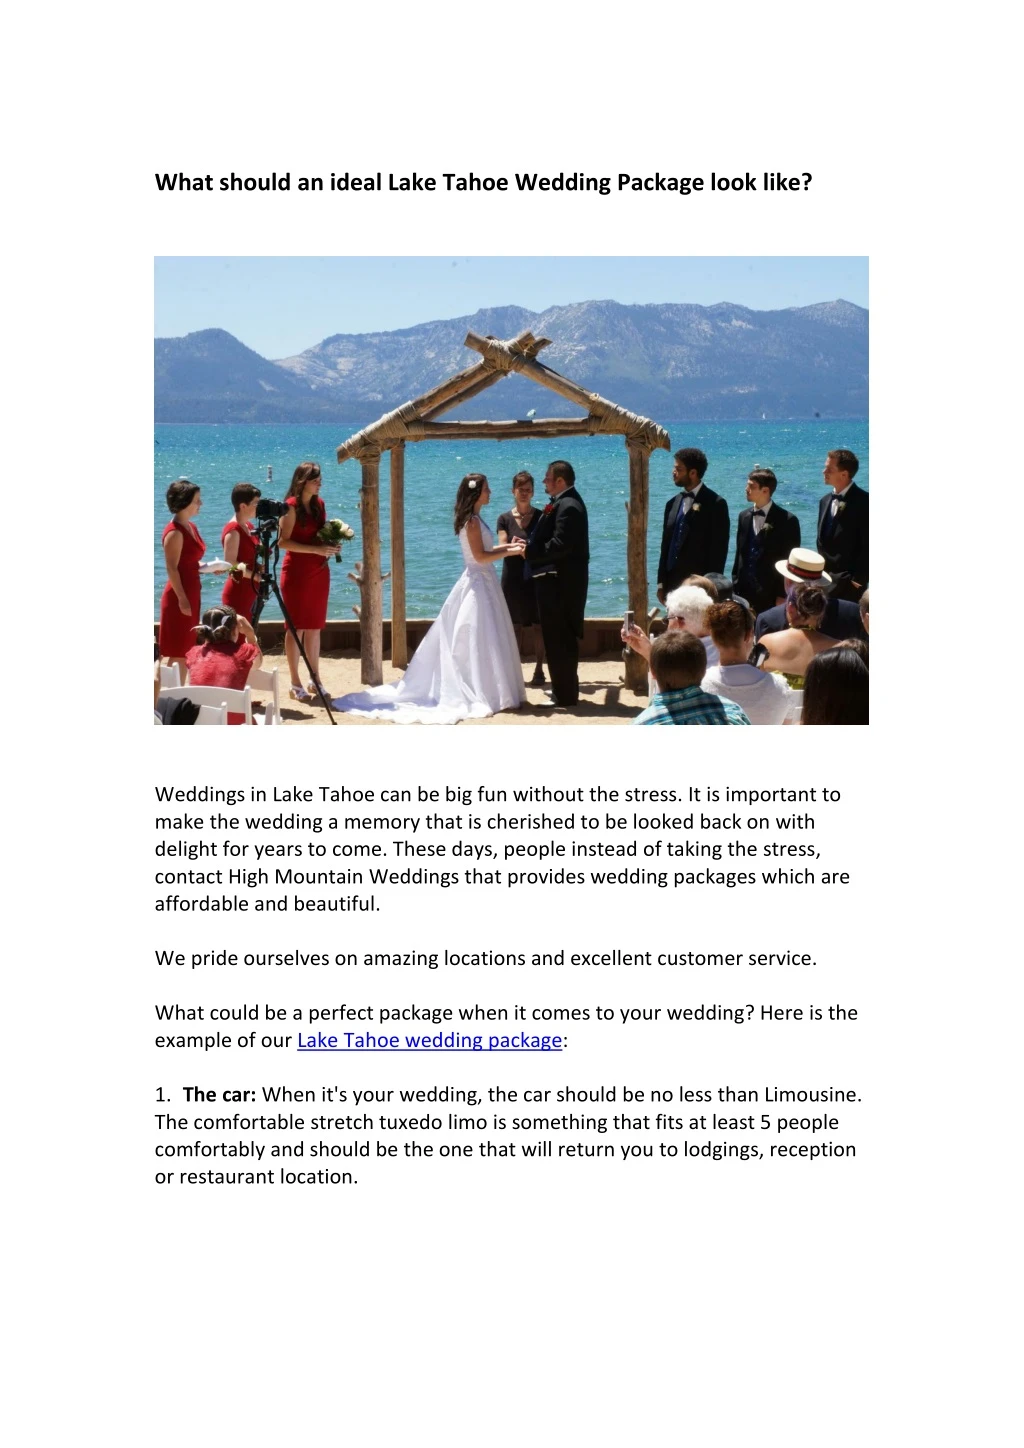 what should an ideal lake tahoe wedding package